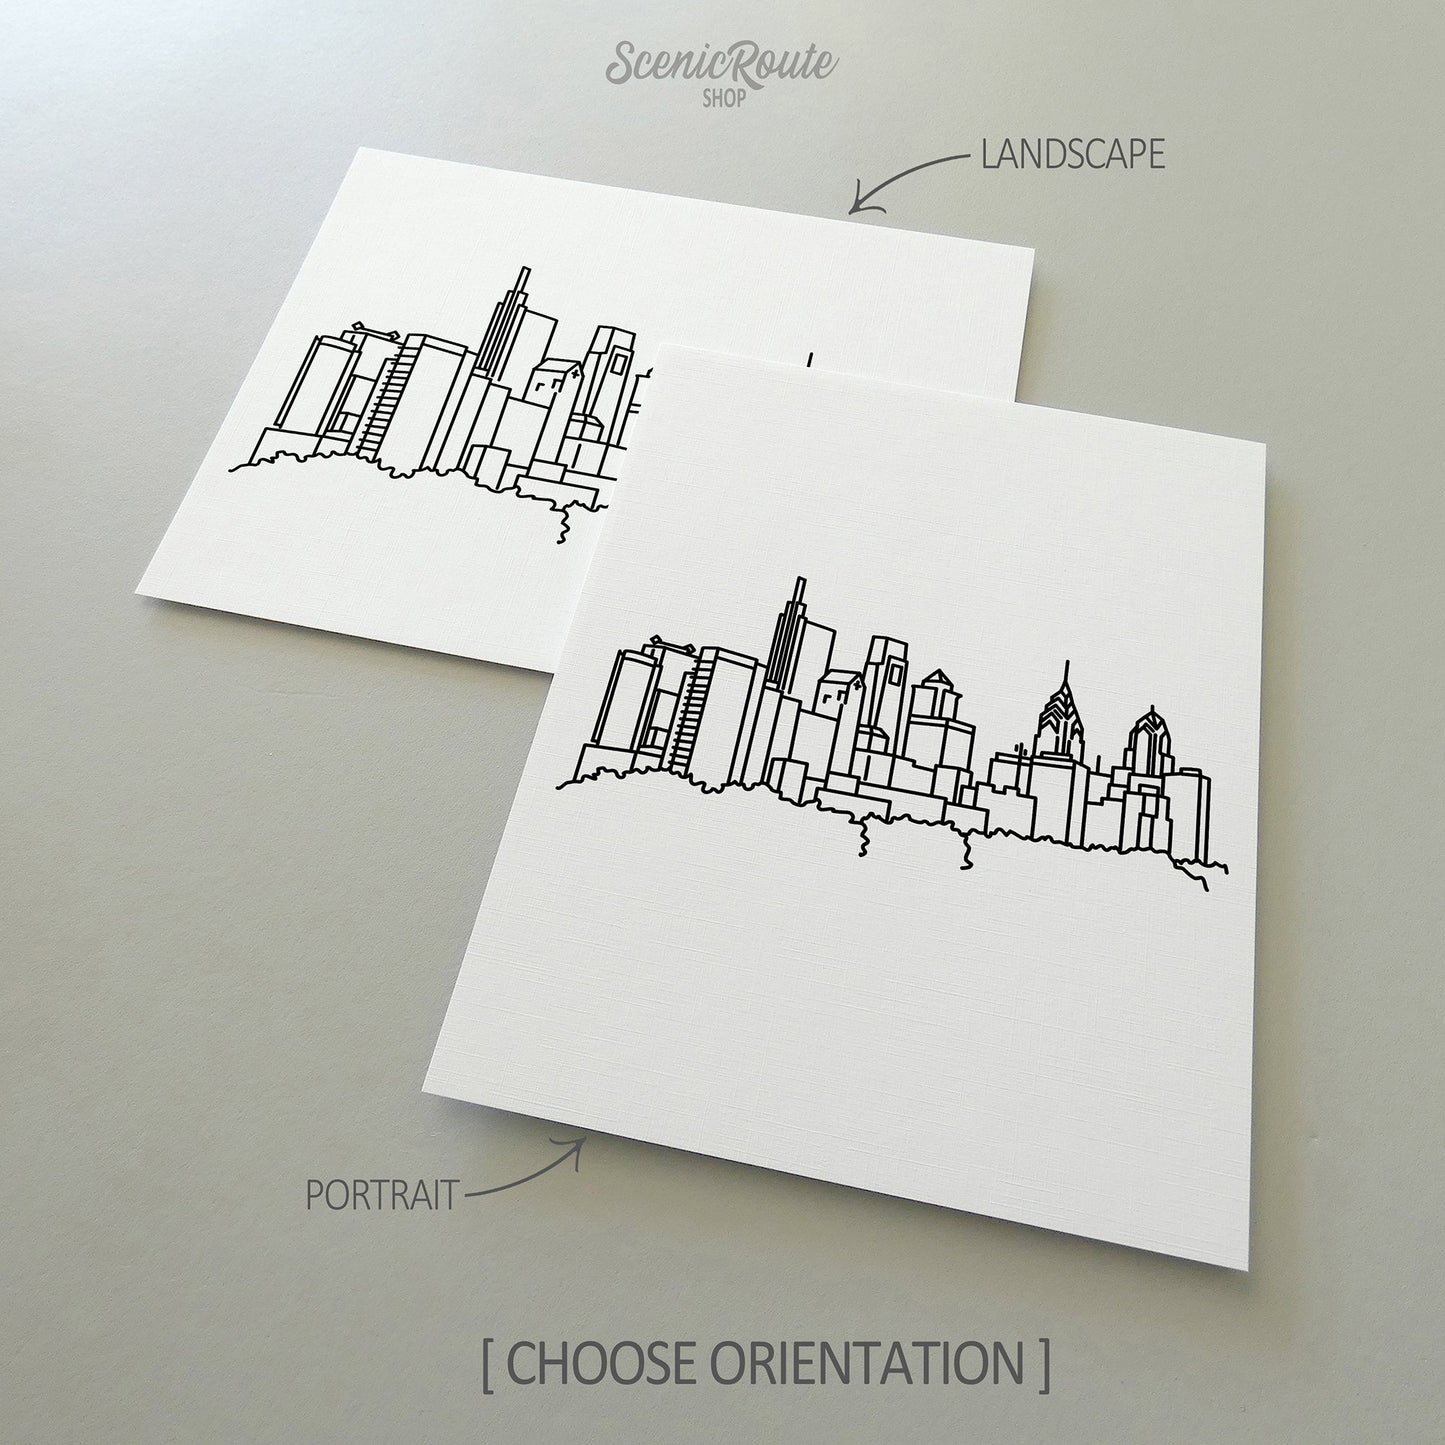 Two line art drawings of the Philadelphia Skyline on white linen paper with a gray background.  The pieces are shown in portrait and landscape orientation for the available art print options.